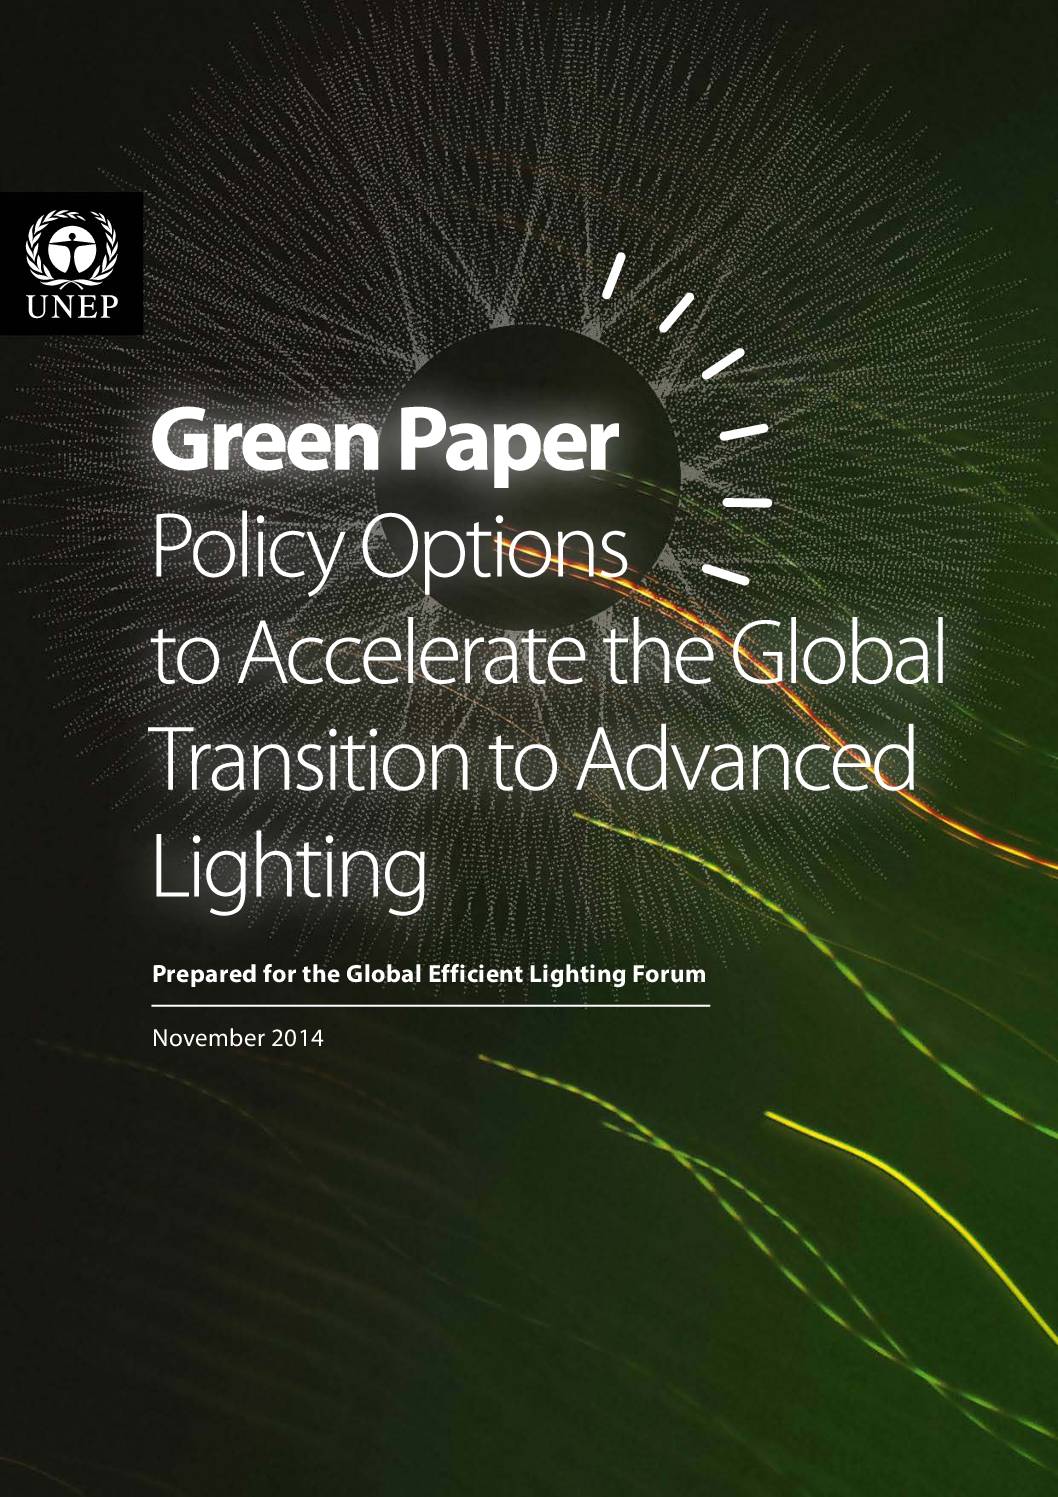 Green Paper: Policy Options to Accelerate the Global Transition to Advanced Lighting